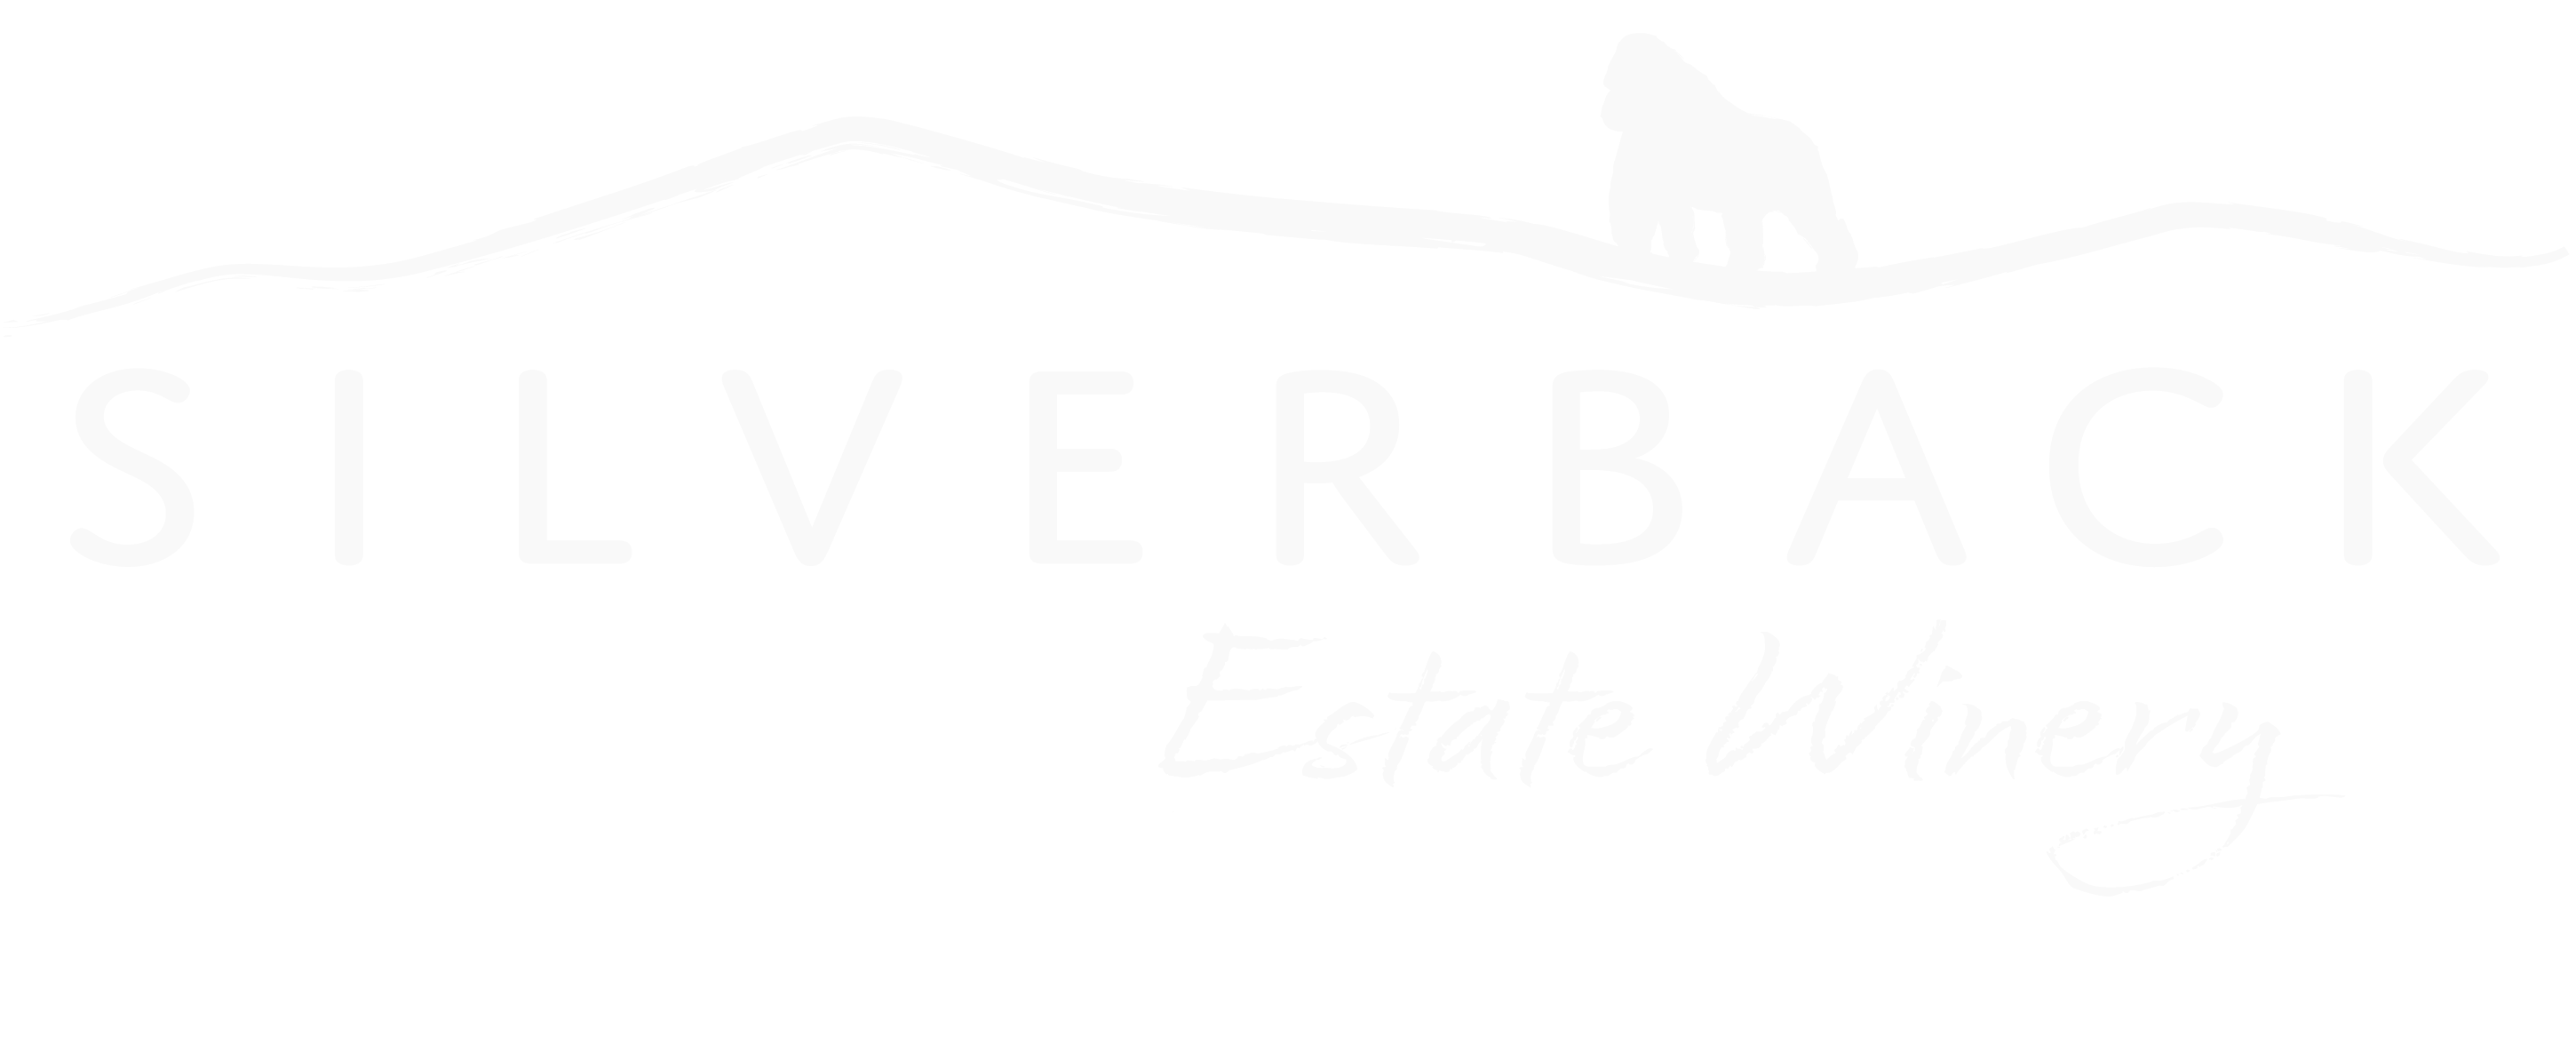 Silverback Estate Winery Scrolled light version of the logo (Link to homepage)